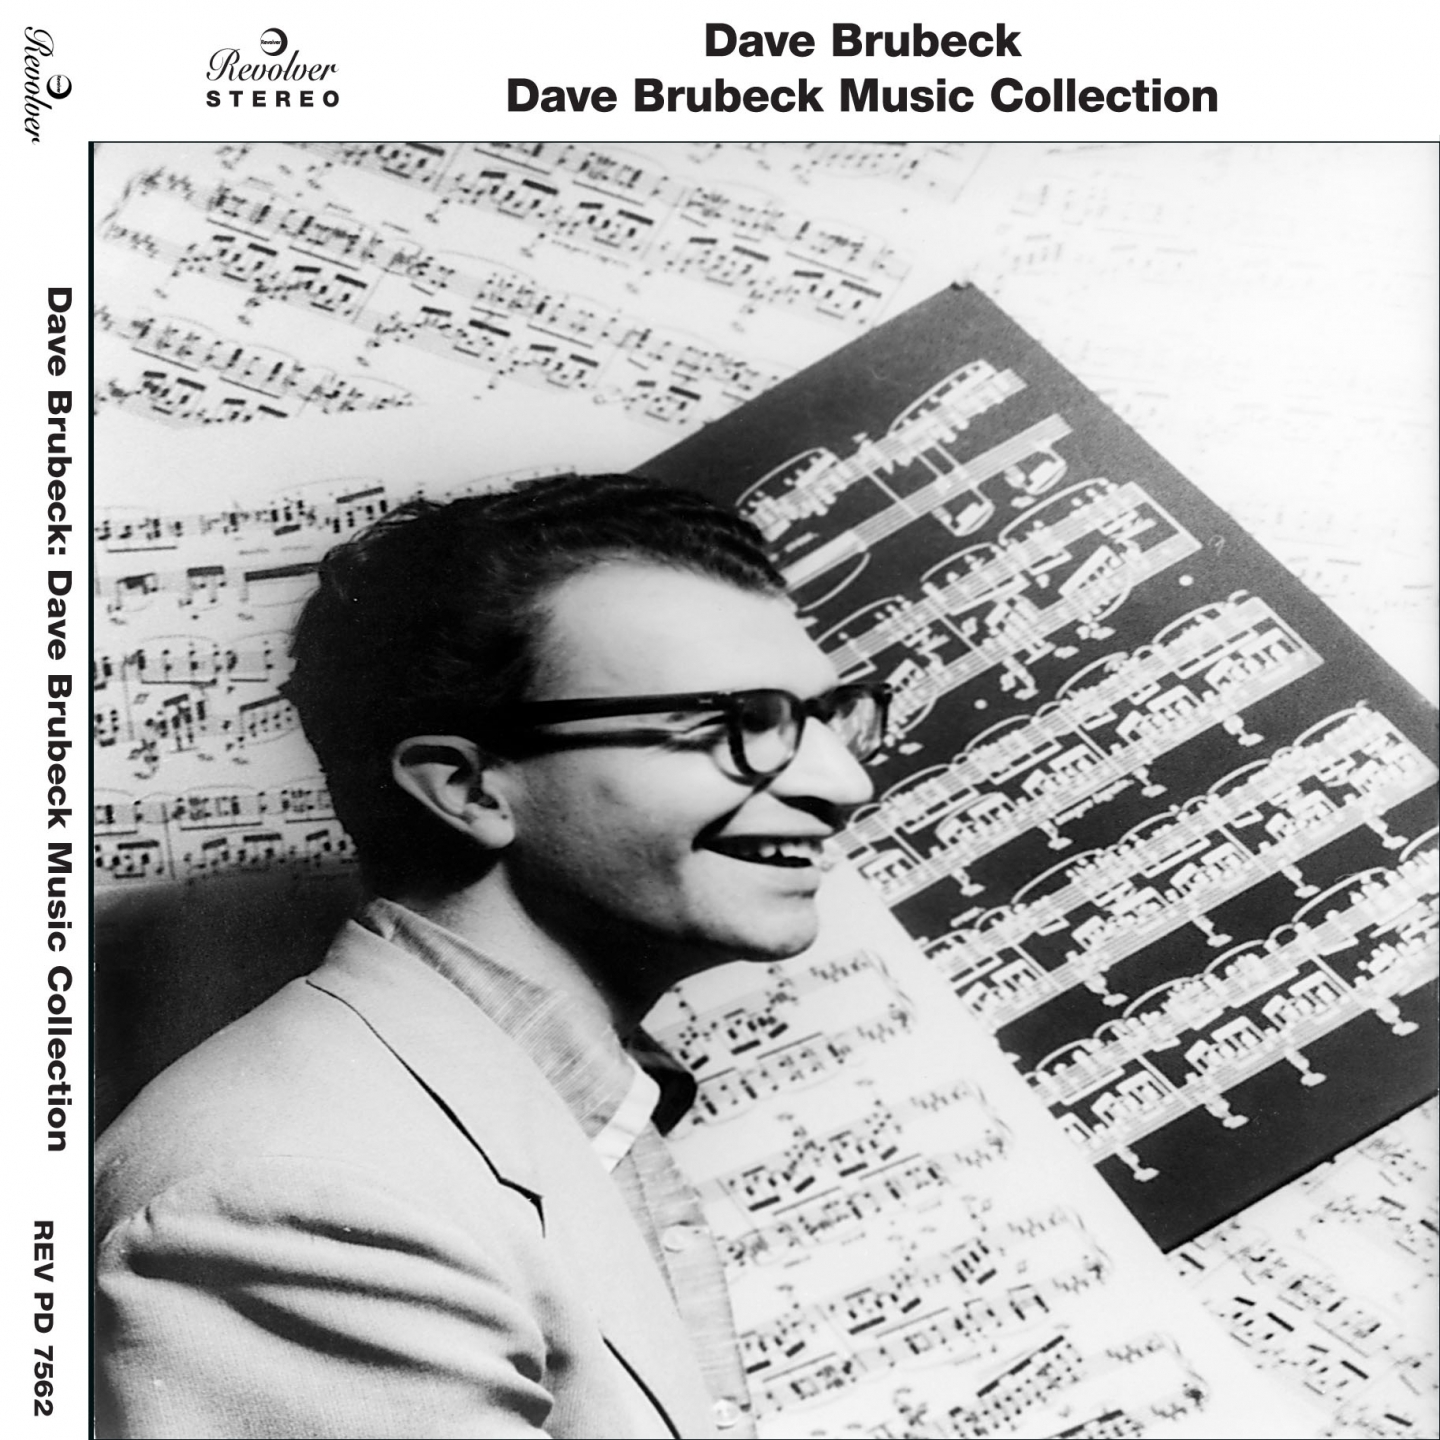 Dave Brubeck Music Collection